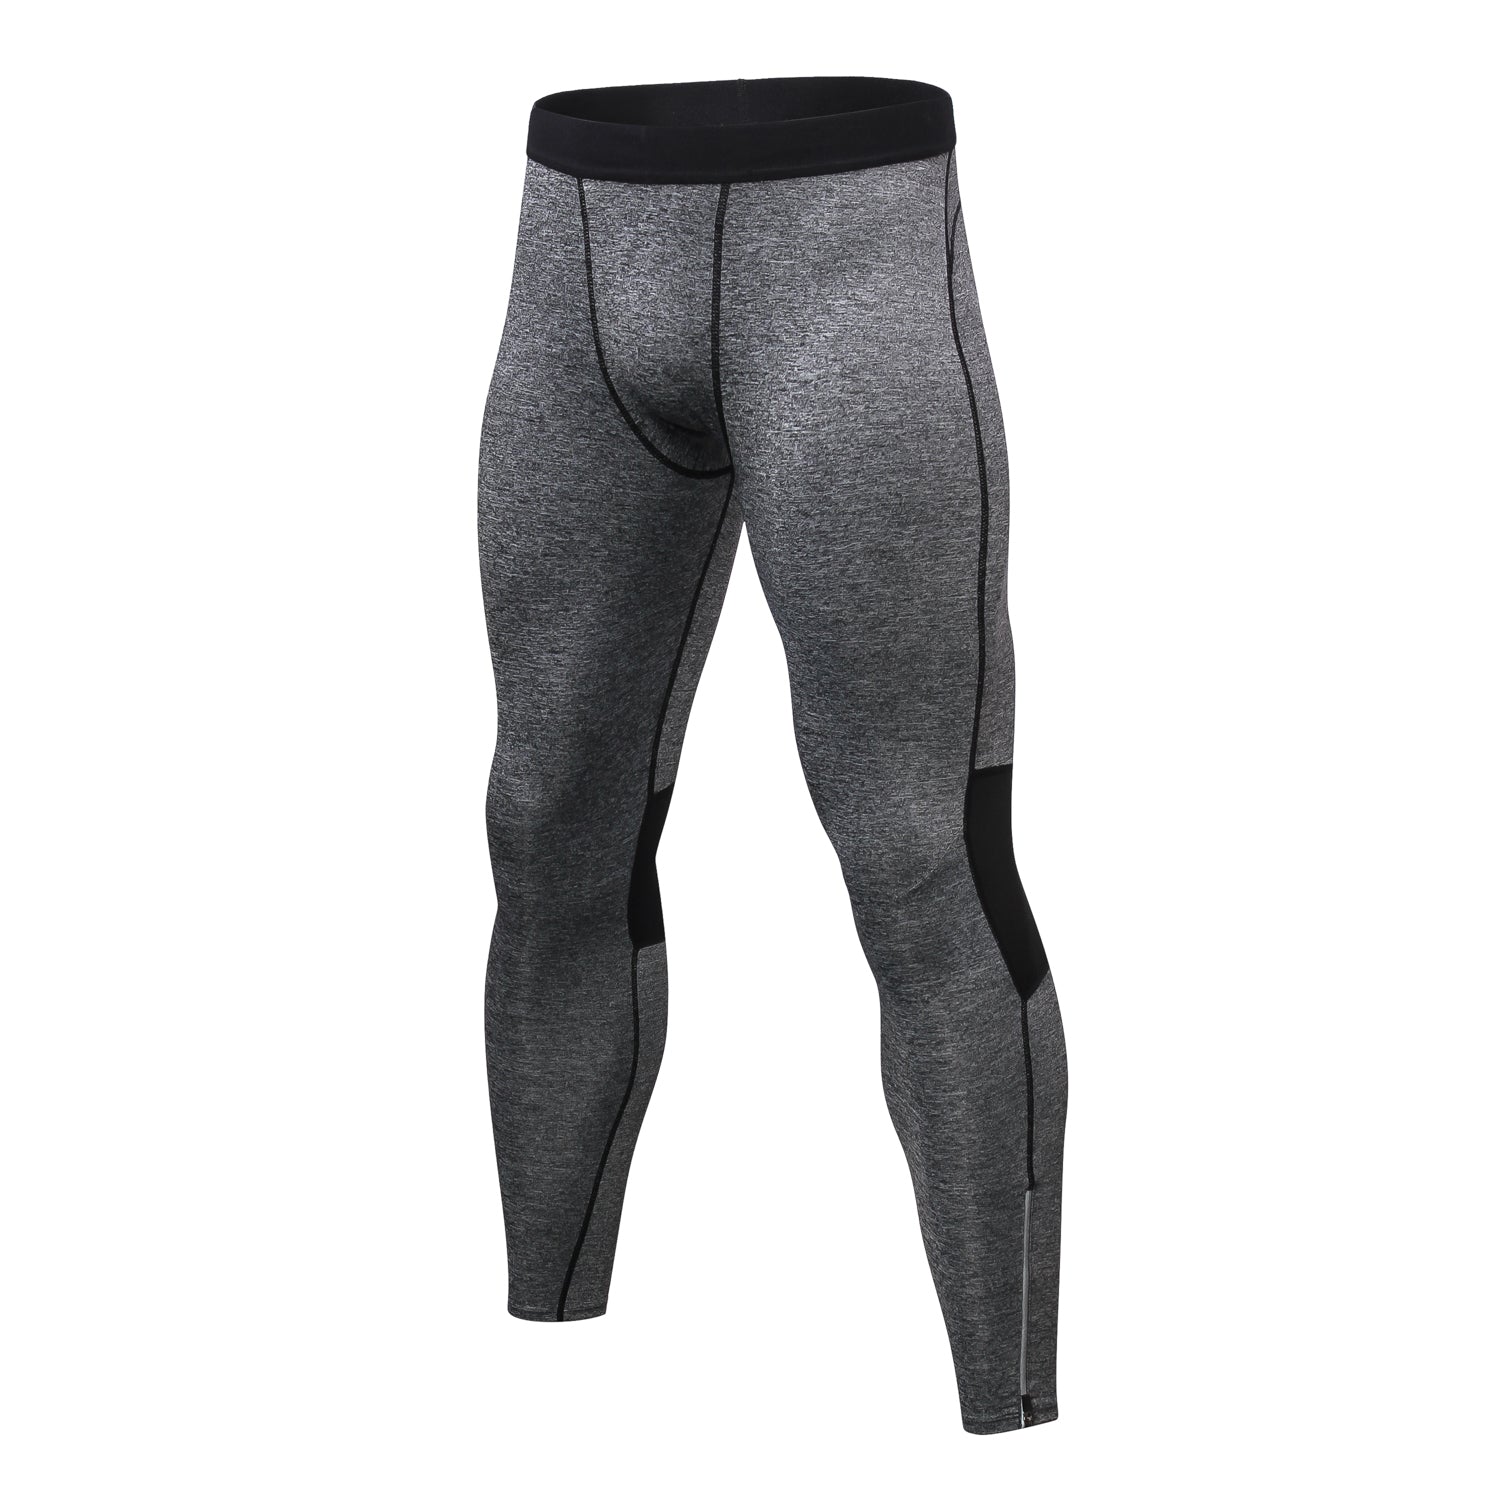 Buy Mens Running Leggings Active Base Layer Bottoms Long John Pants Compression  Tights for Workout and Training at